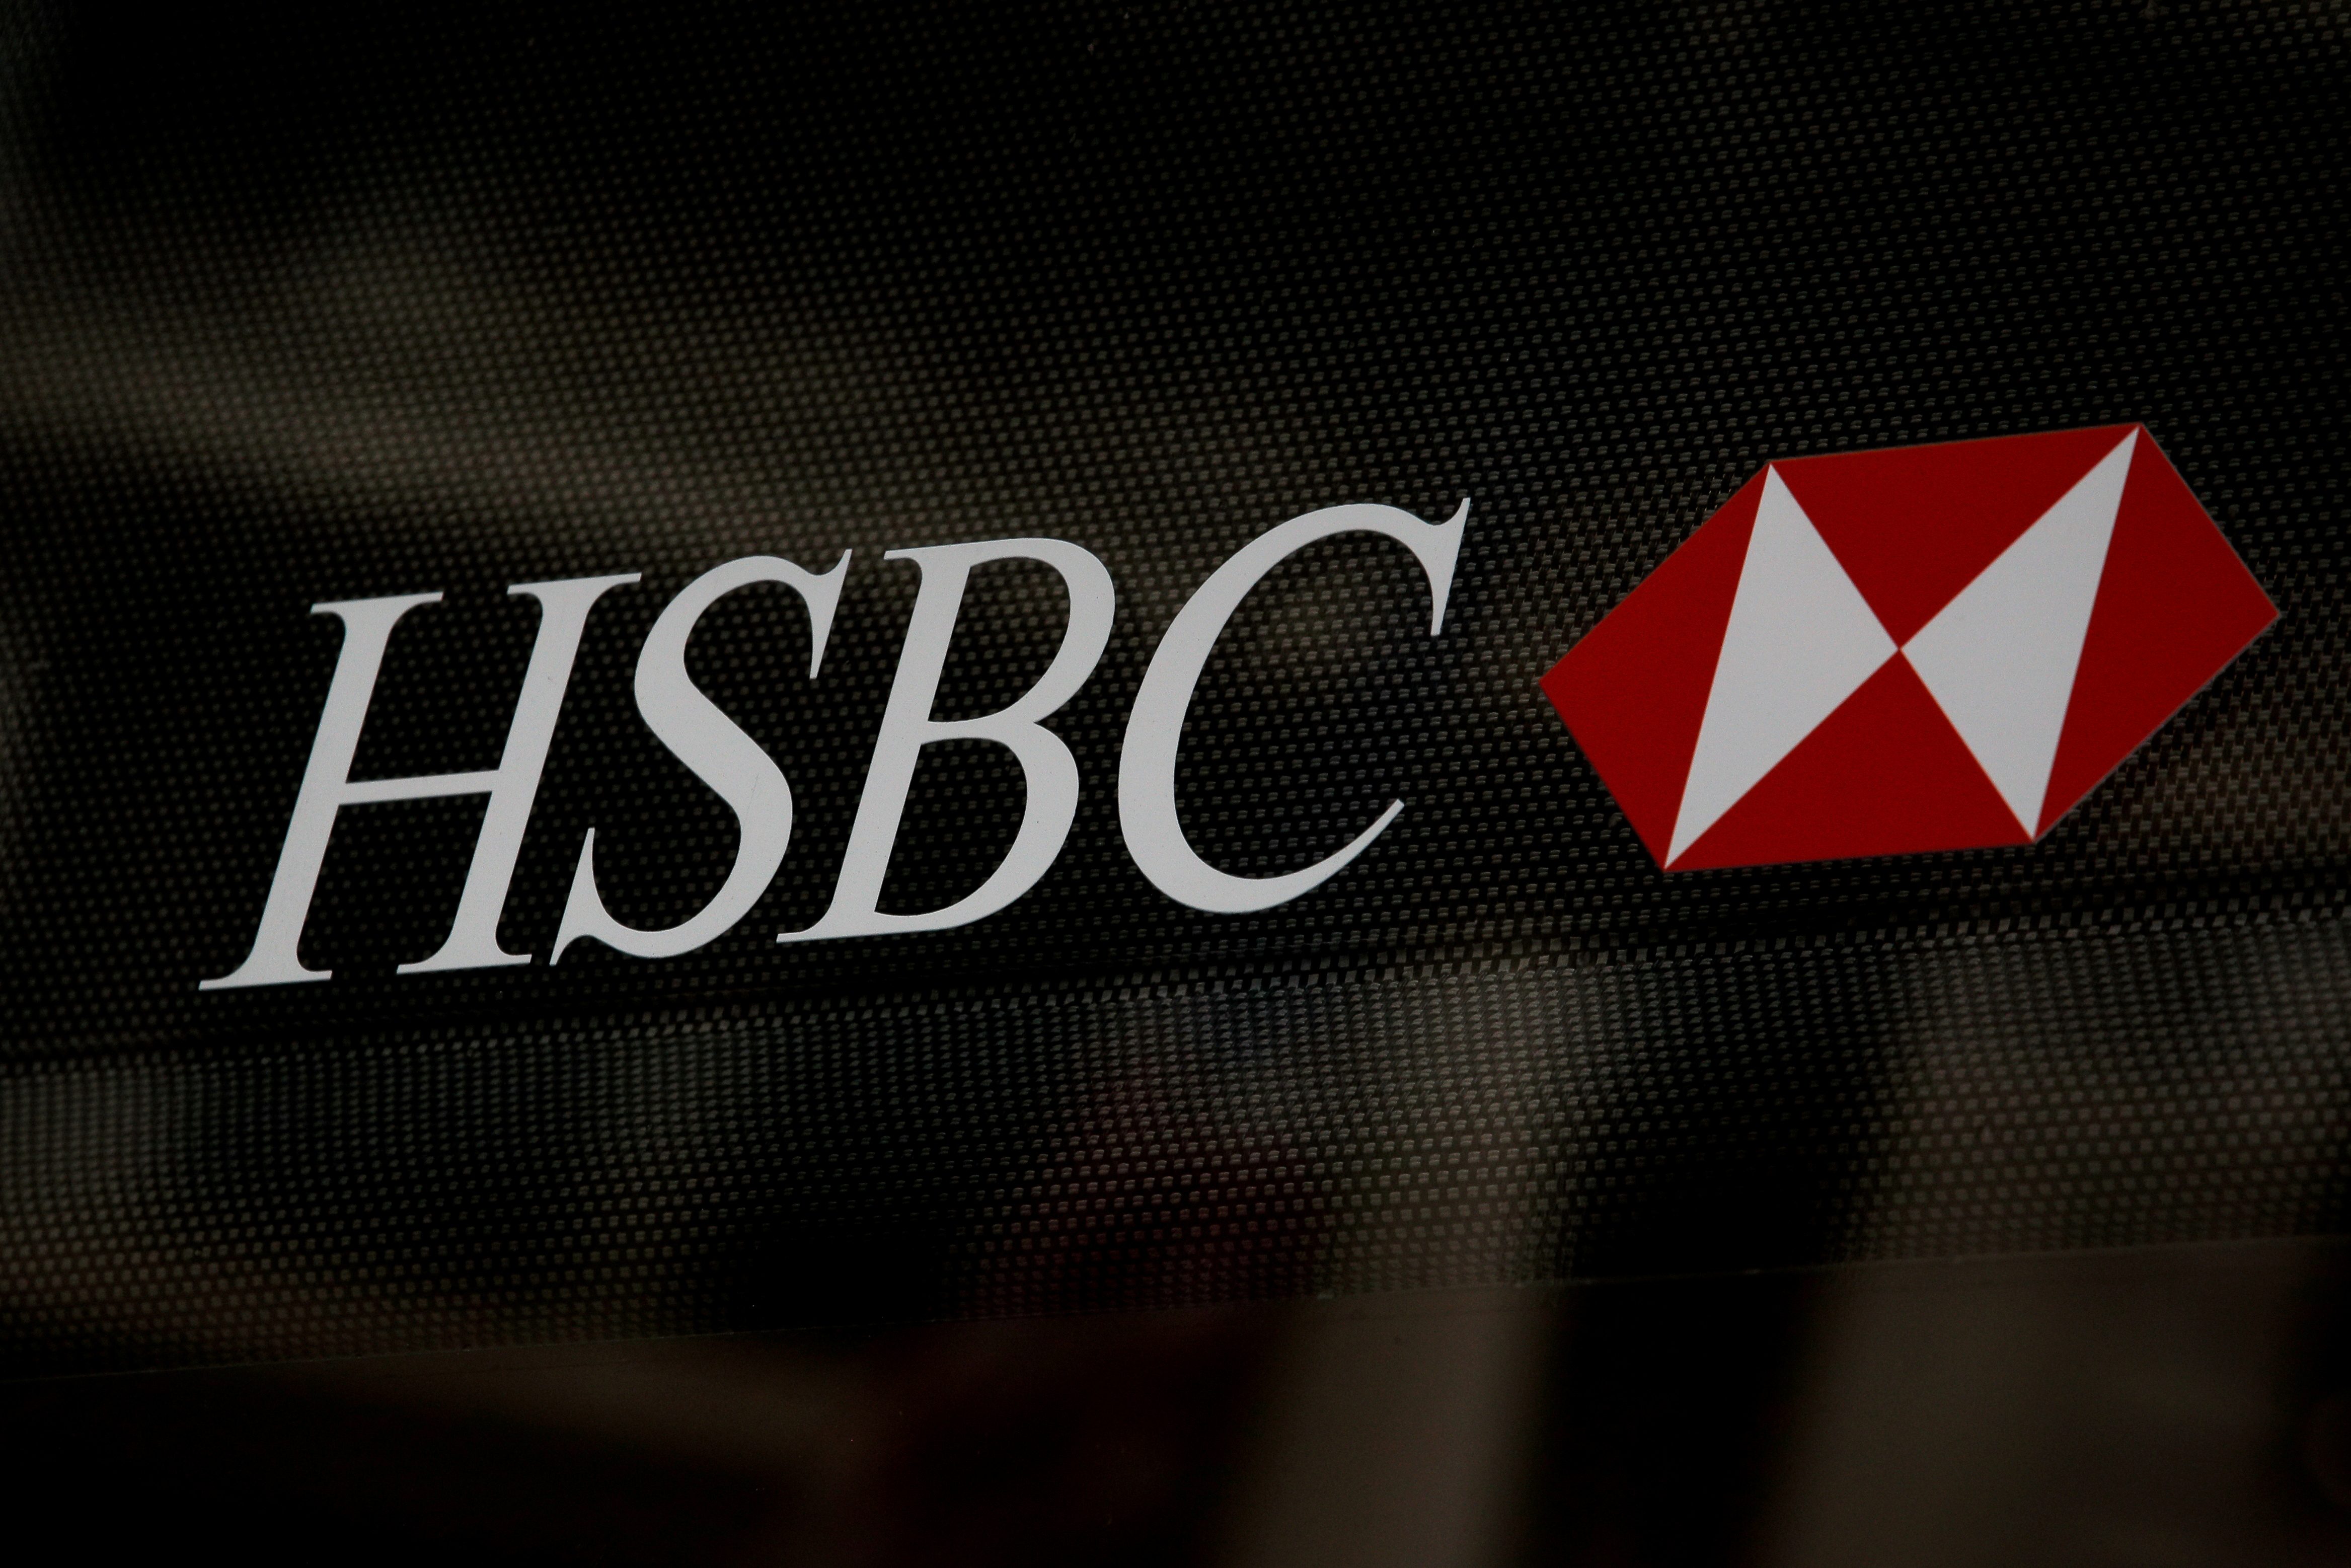 HSBC to face shareholder heat on fossil fuels in general meeting vote